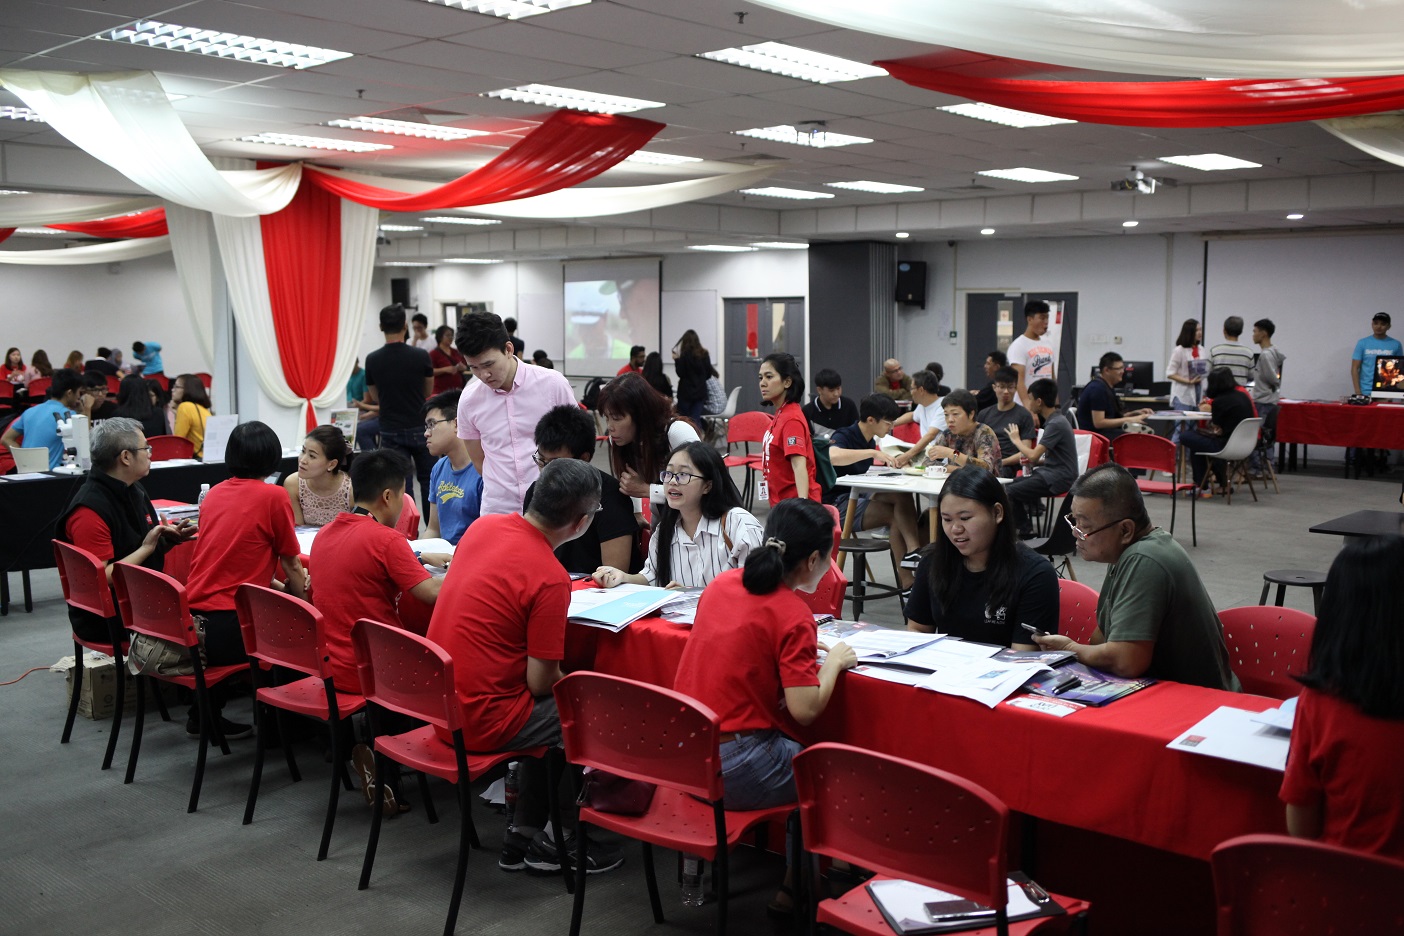 A scene from March 2018 Open Day event at the Sarawak campus in Kuching.